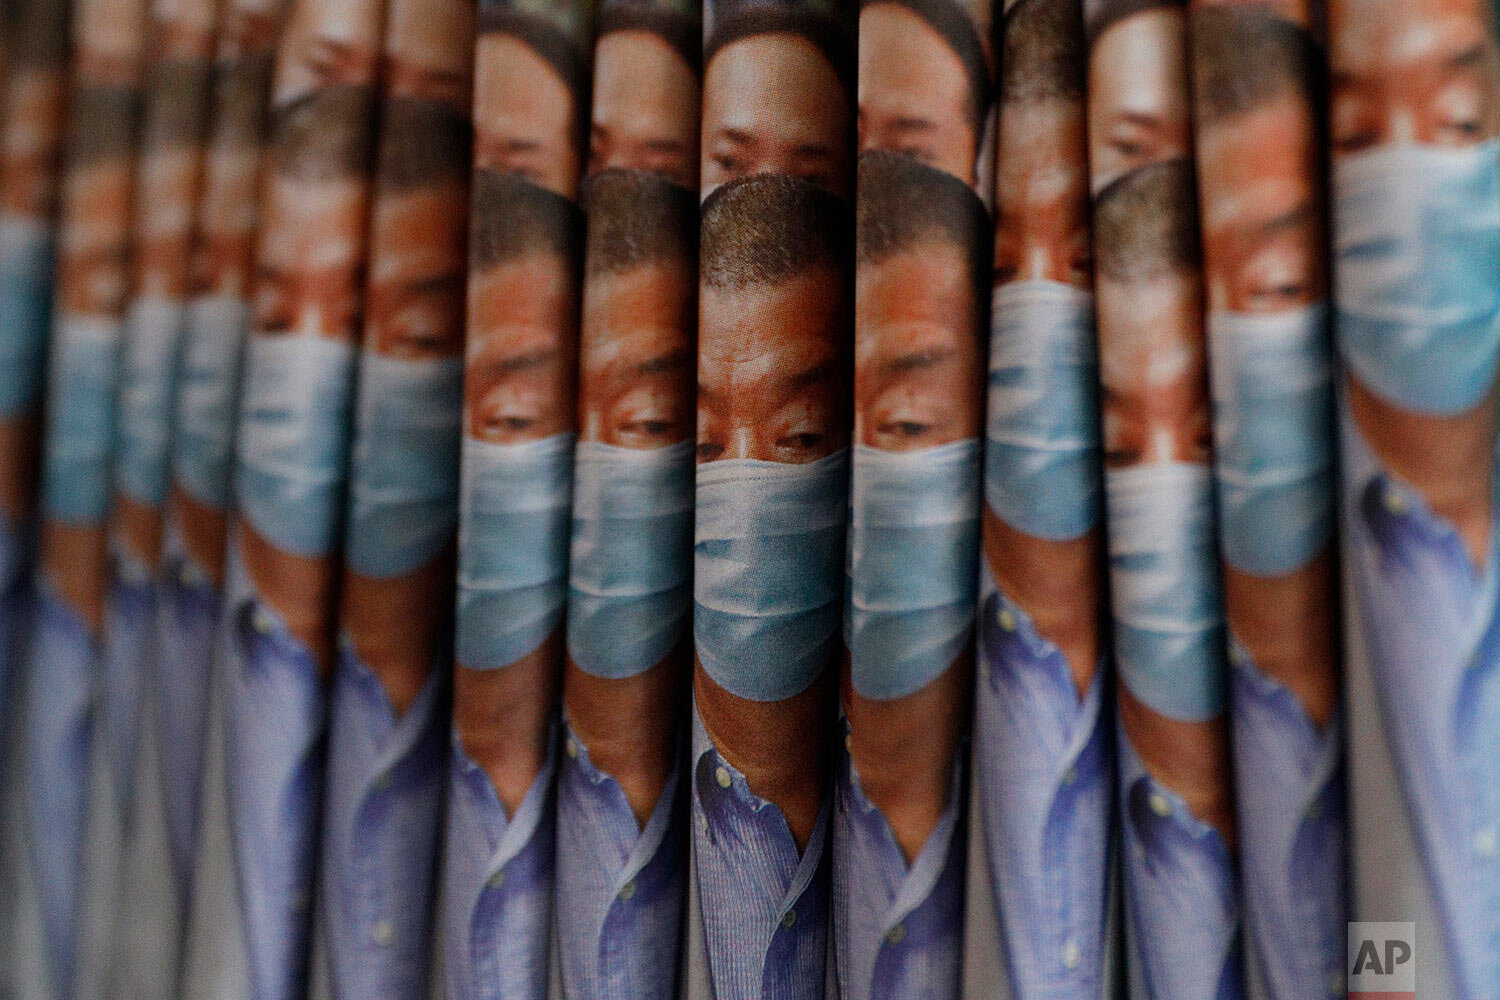  Copies of Apple Daily newspaper with front pages featuring Hong Kong media tycoon Jimmy Lai, are displayed for sale at a newsstand in Hong Kong, Tuesday, Aug. 11, 2020.  (AP Photo/Kin Cheung) 